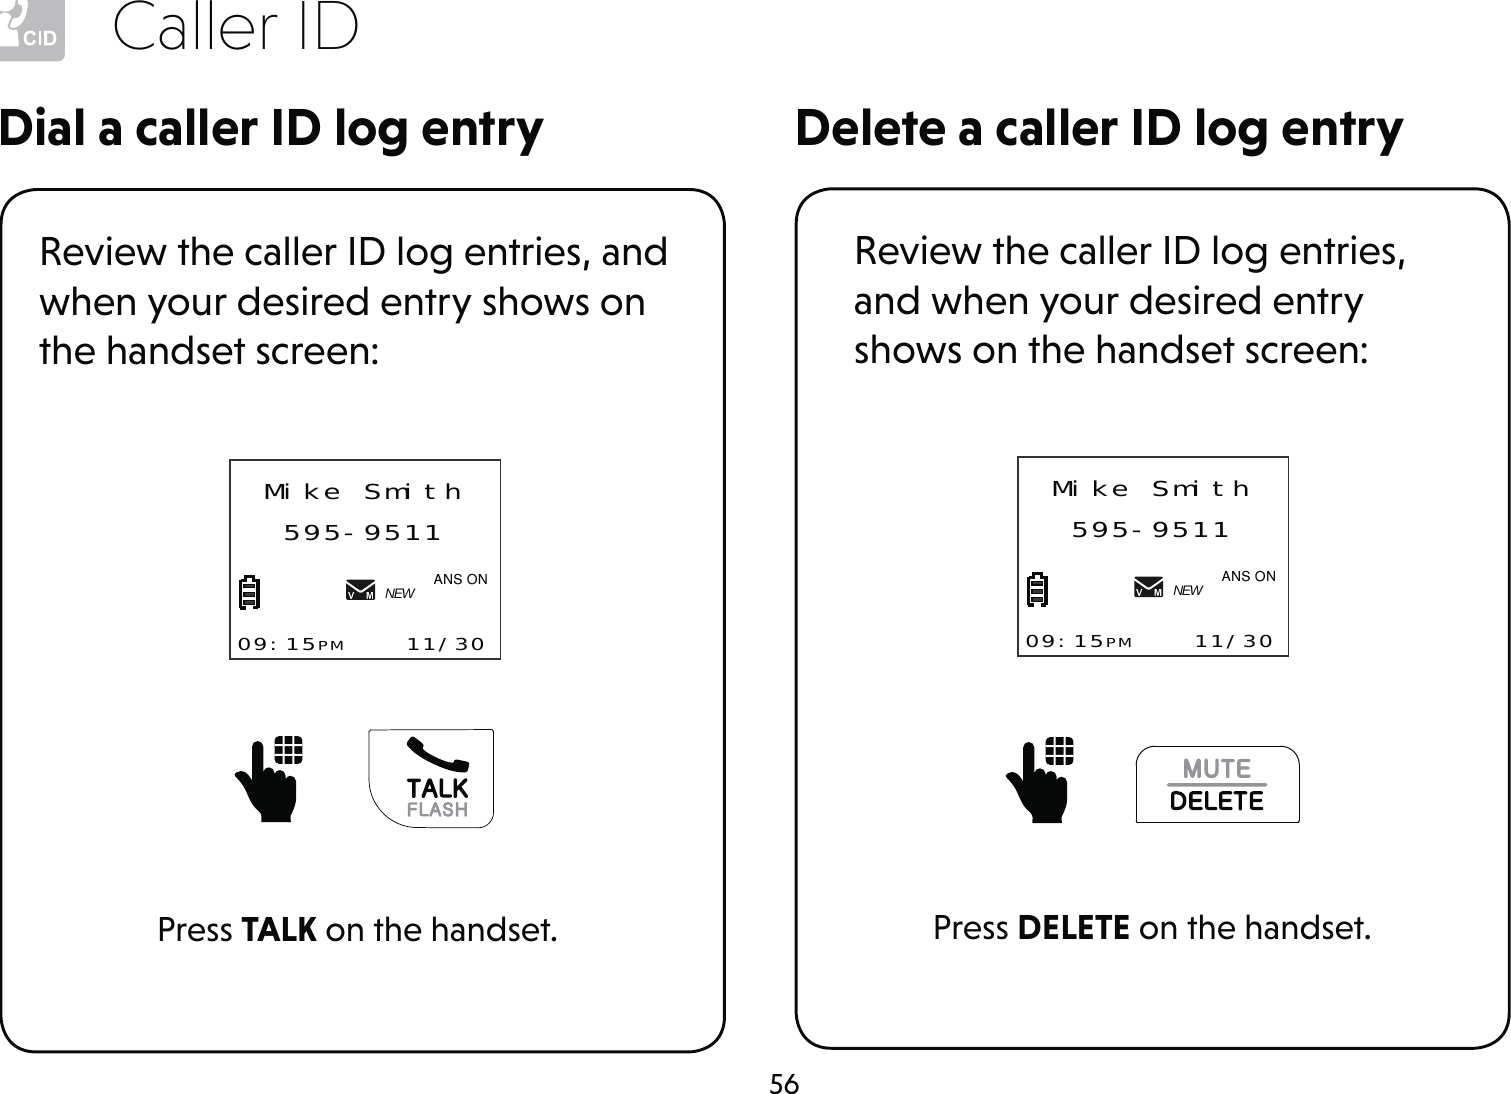 56Caller IDDelete a caller ID log entryDial a caller ID log entryReview the caller ID log entries, and when your desired entry shows on the handset screen:Press TALK on the handset.      Mike Smith595-951109:15PM    11/30NEW$1621Review the caller ID log entries, and when your desired entry shows on the handset screen:Press DELETE on the handset.Mike Smith595-951109:15PM    11/30NEW$1621